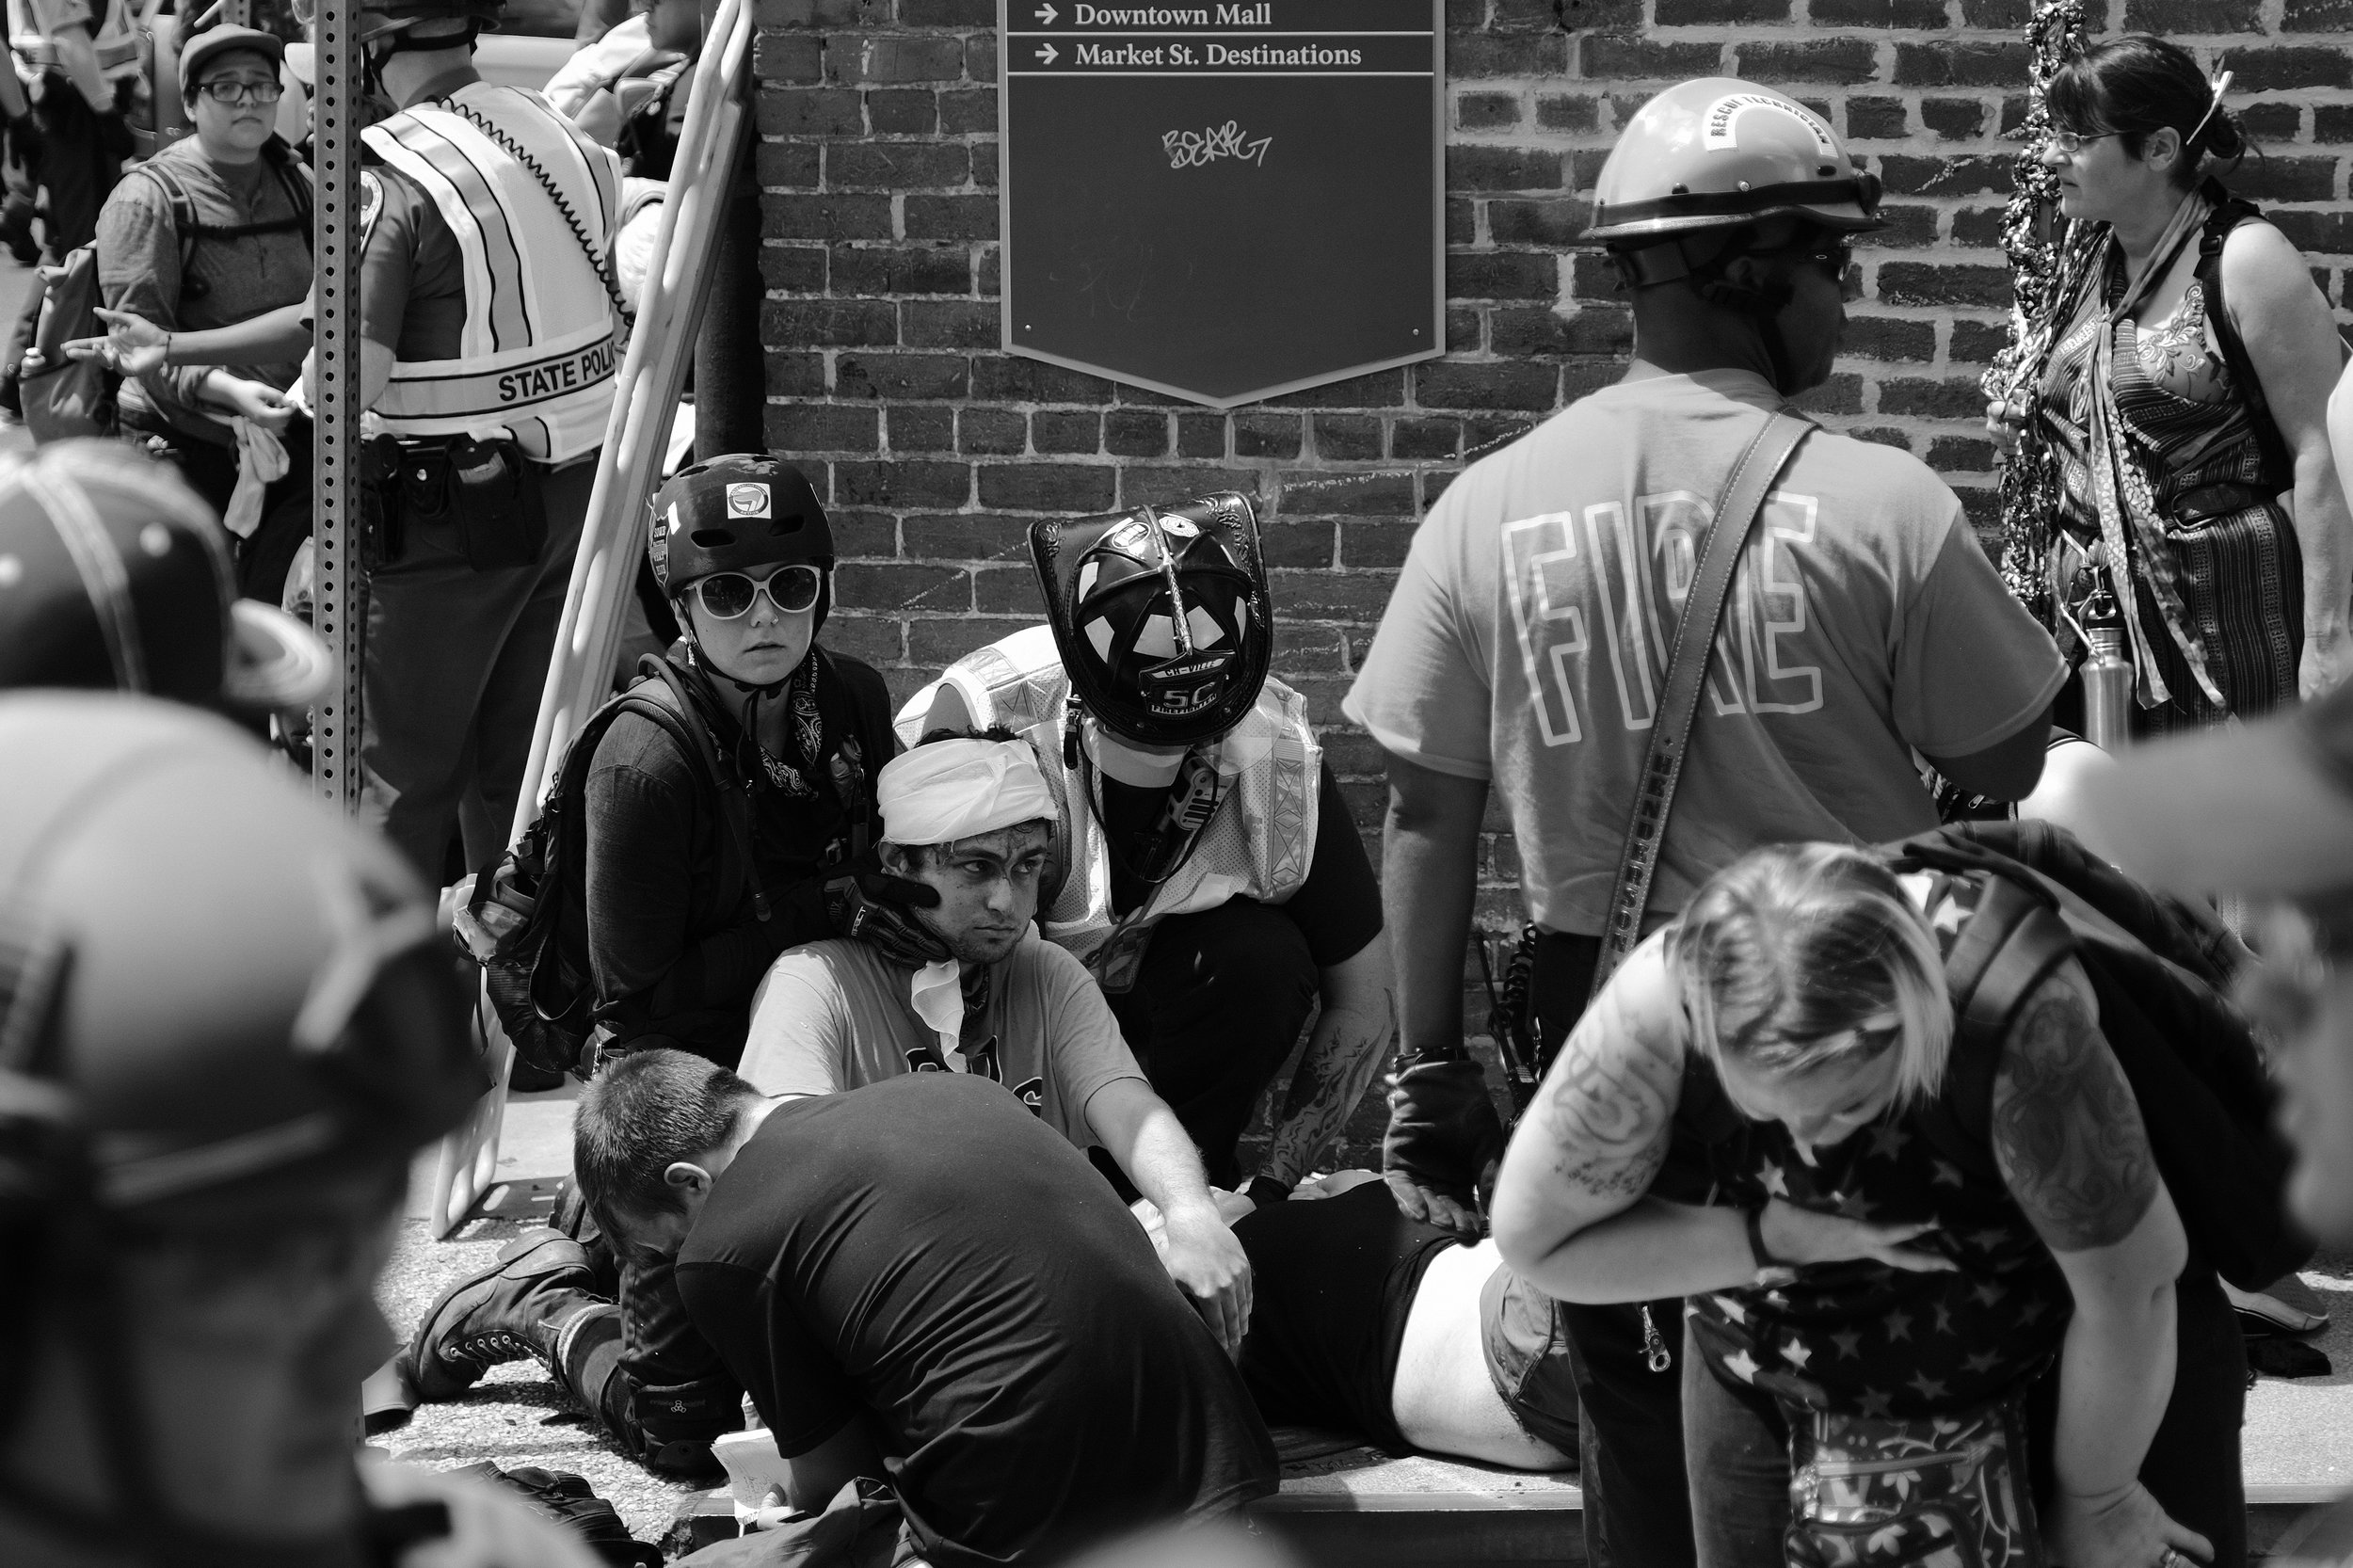  At approximately 1:45 PM, hours after the white supremacists retreated, a car plowed through a crowd of celebrating protesters, killing Heather Heyer and injuring at least 19 others. The car was allegedly driven by James Fields who was arrested and 